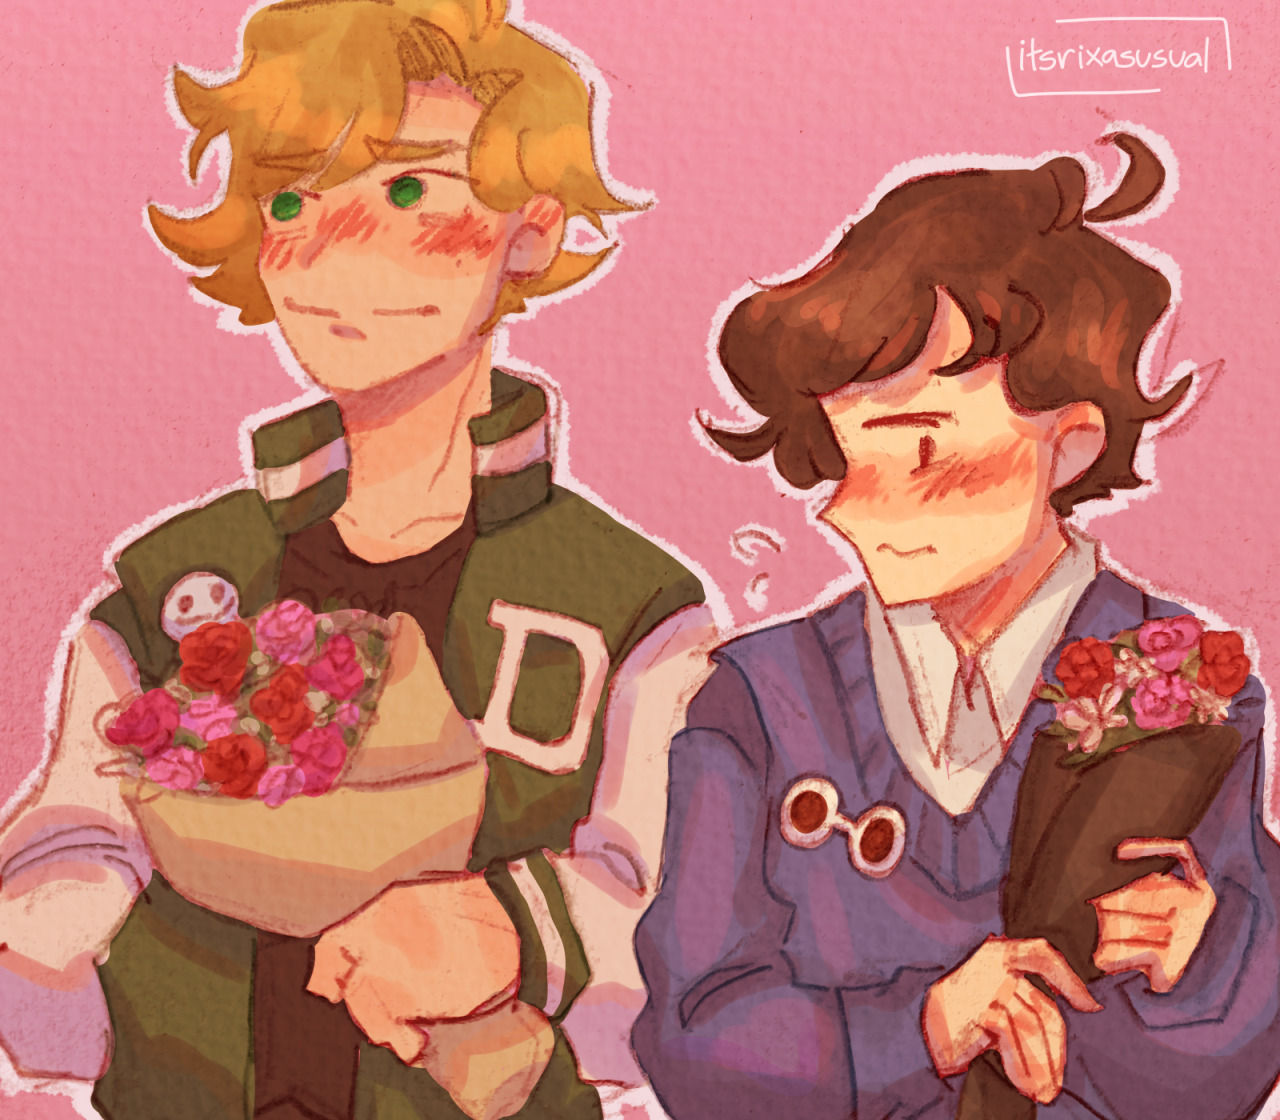 They are both in highschool and got each other flowas. Happy Valentines :]] #dnf fanart#dreamwastaken#georgenotfound#dreamnotfound#dreamnotfound fanart#dream fanart#dnf#georgenotfound fanart